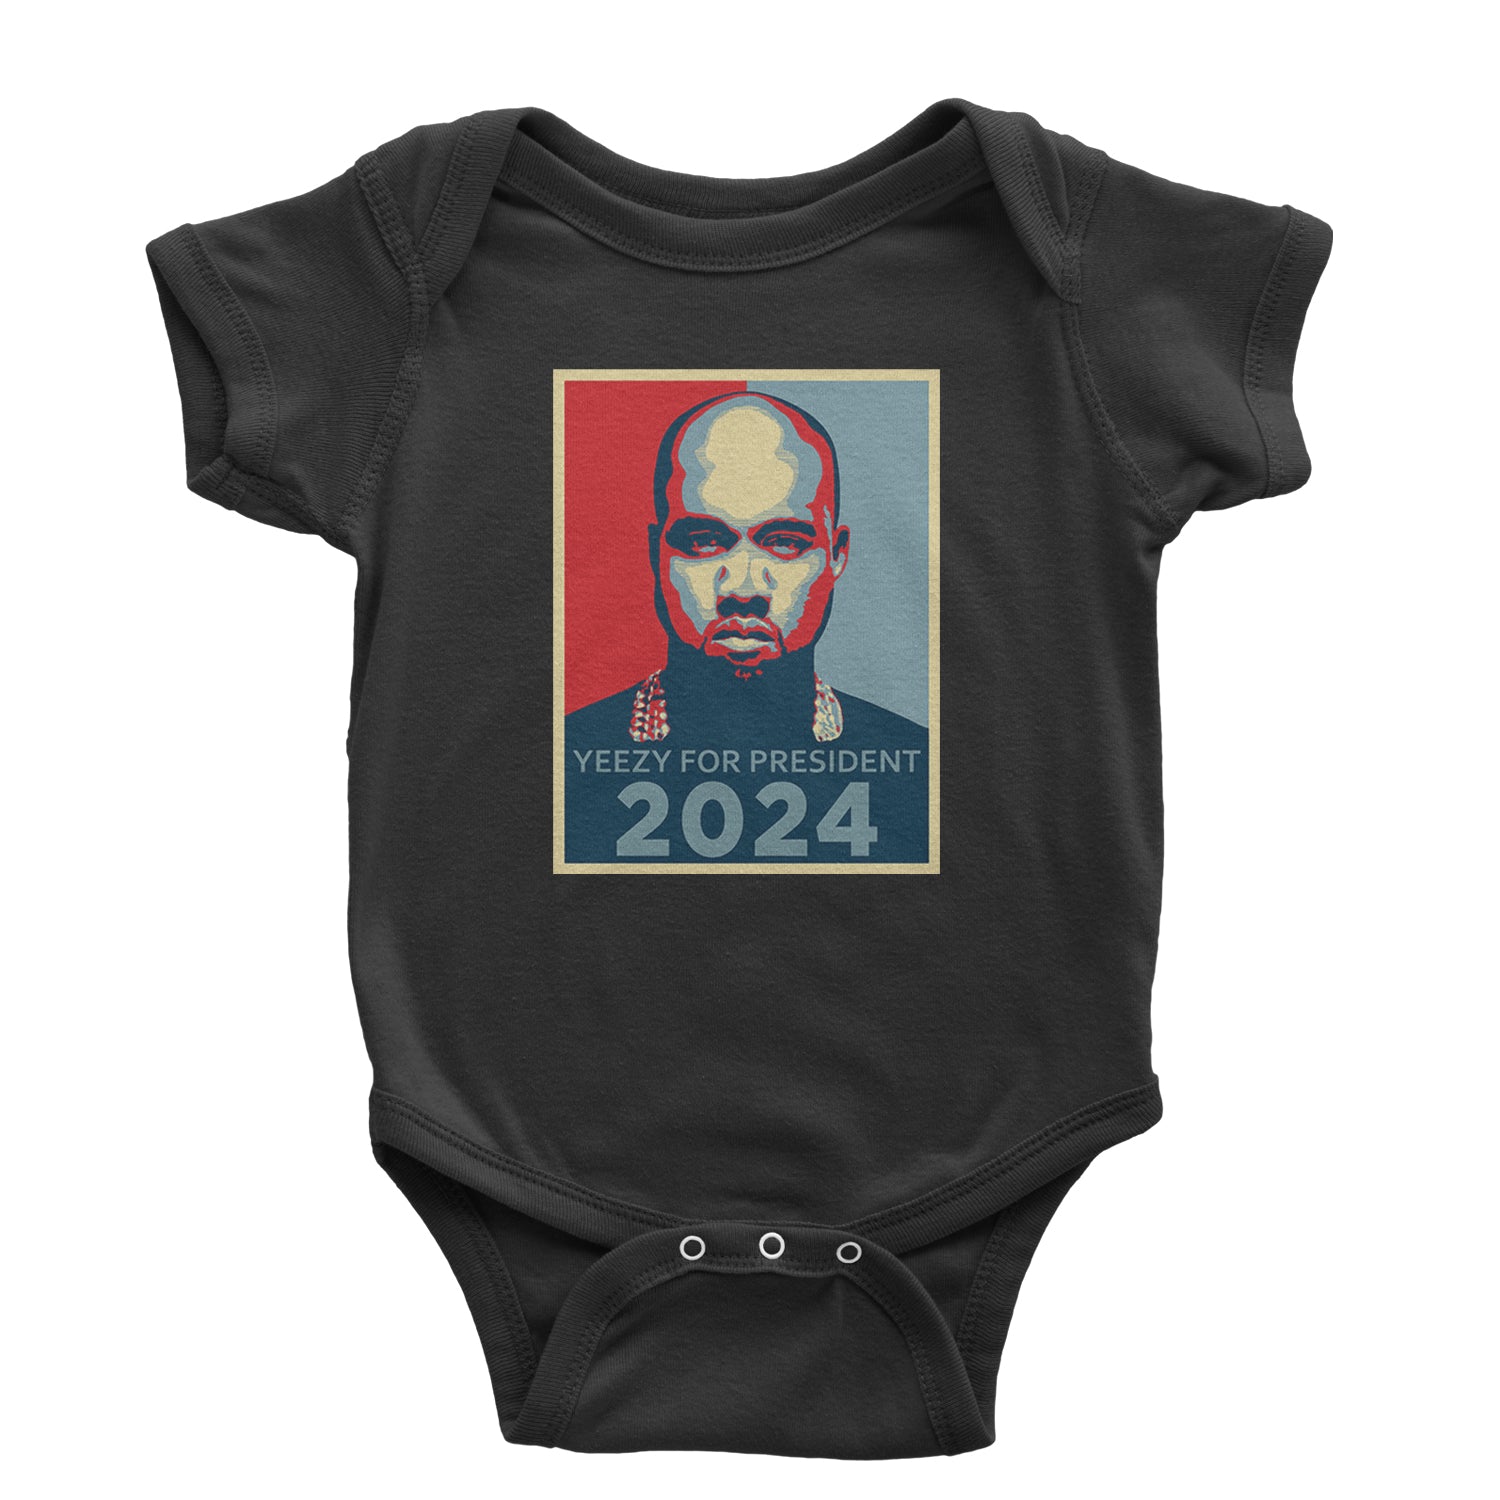 Yeezus For President Infant One-Piece Romper Bodysuit and Toddler T-shirt